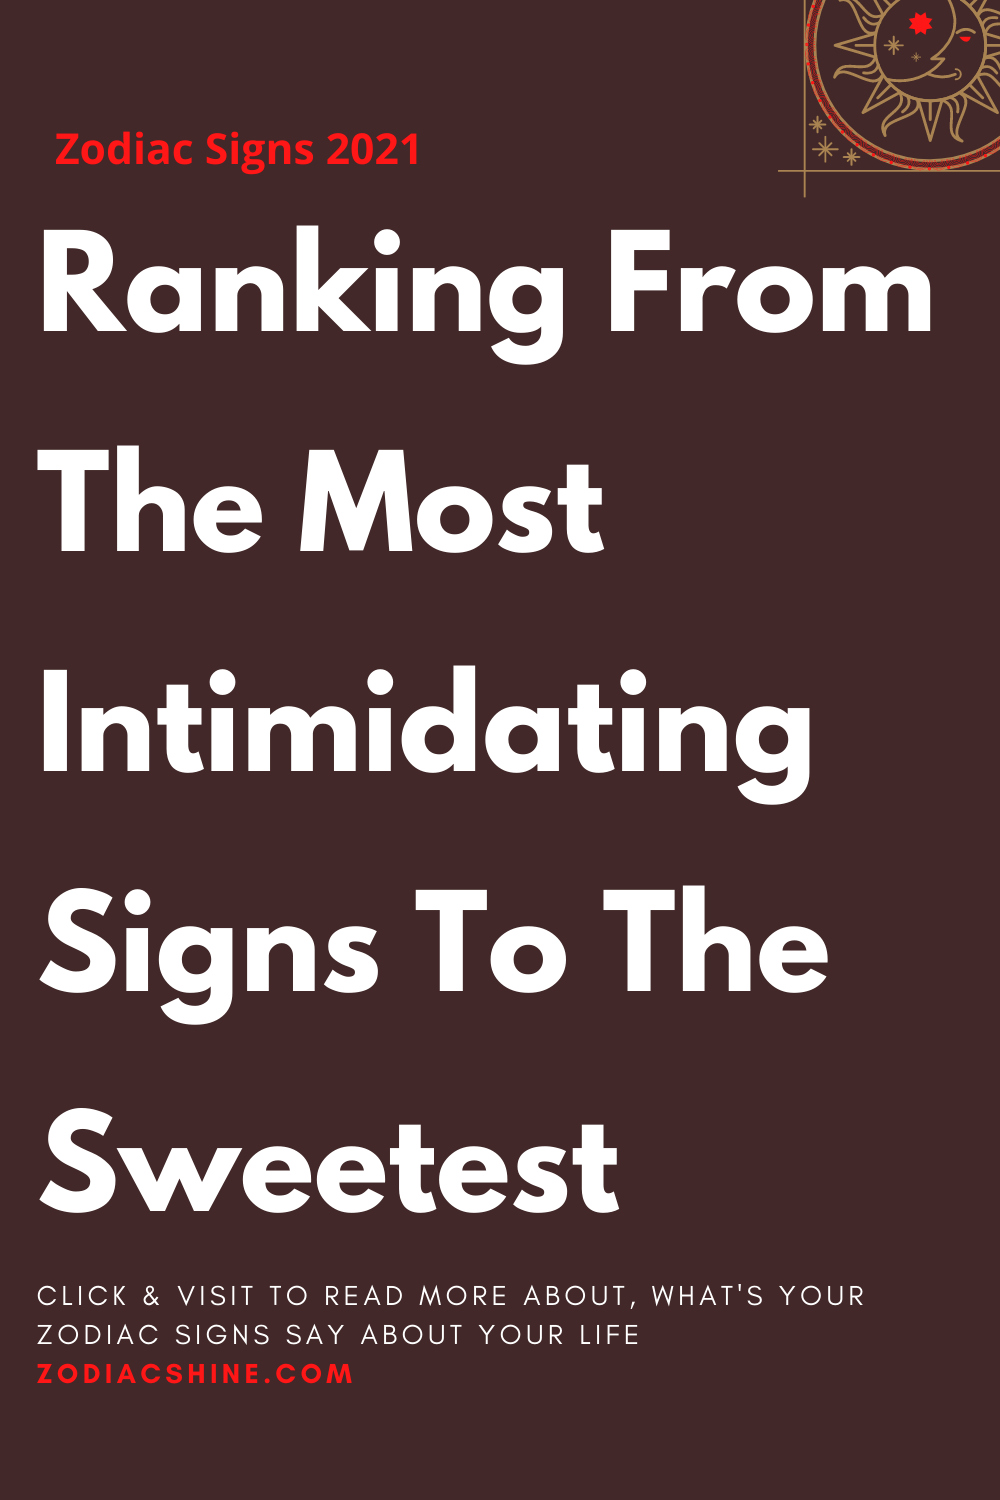 Ranking From The Most Intimidating Signs To The Sweetest